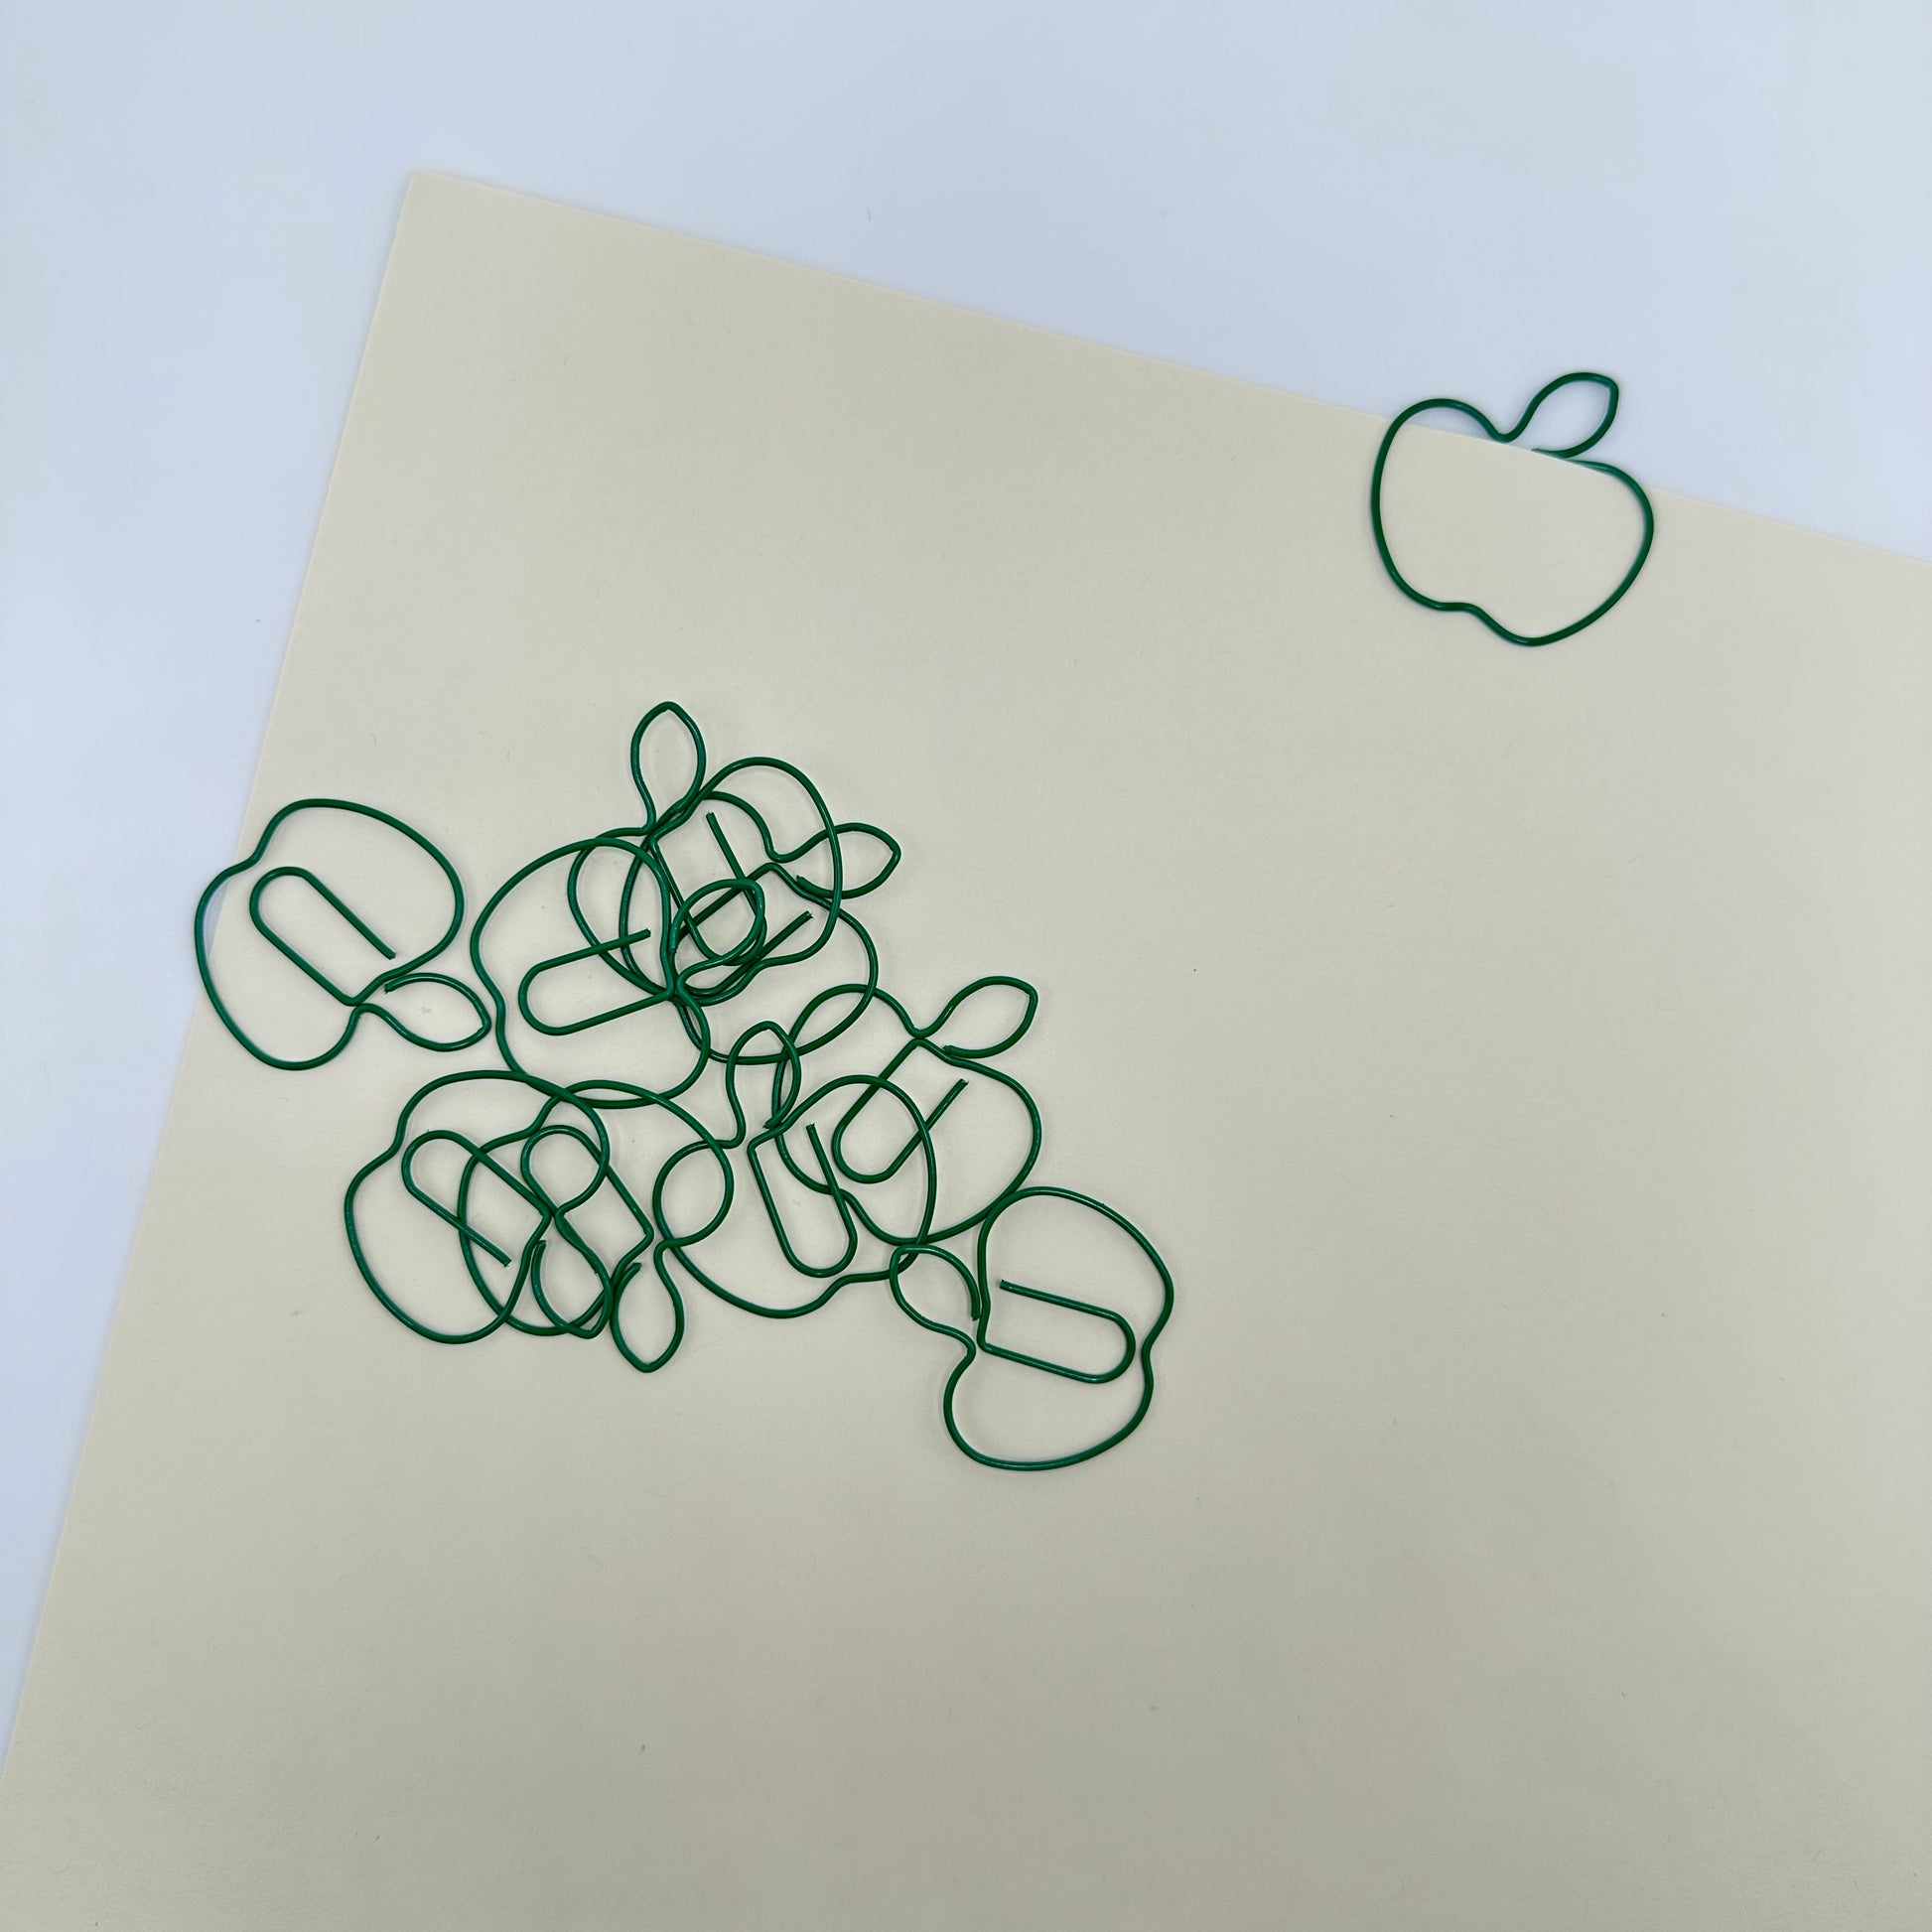 Pile of green apple paperclips on a cream piece of paper.